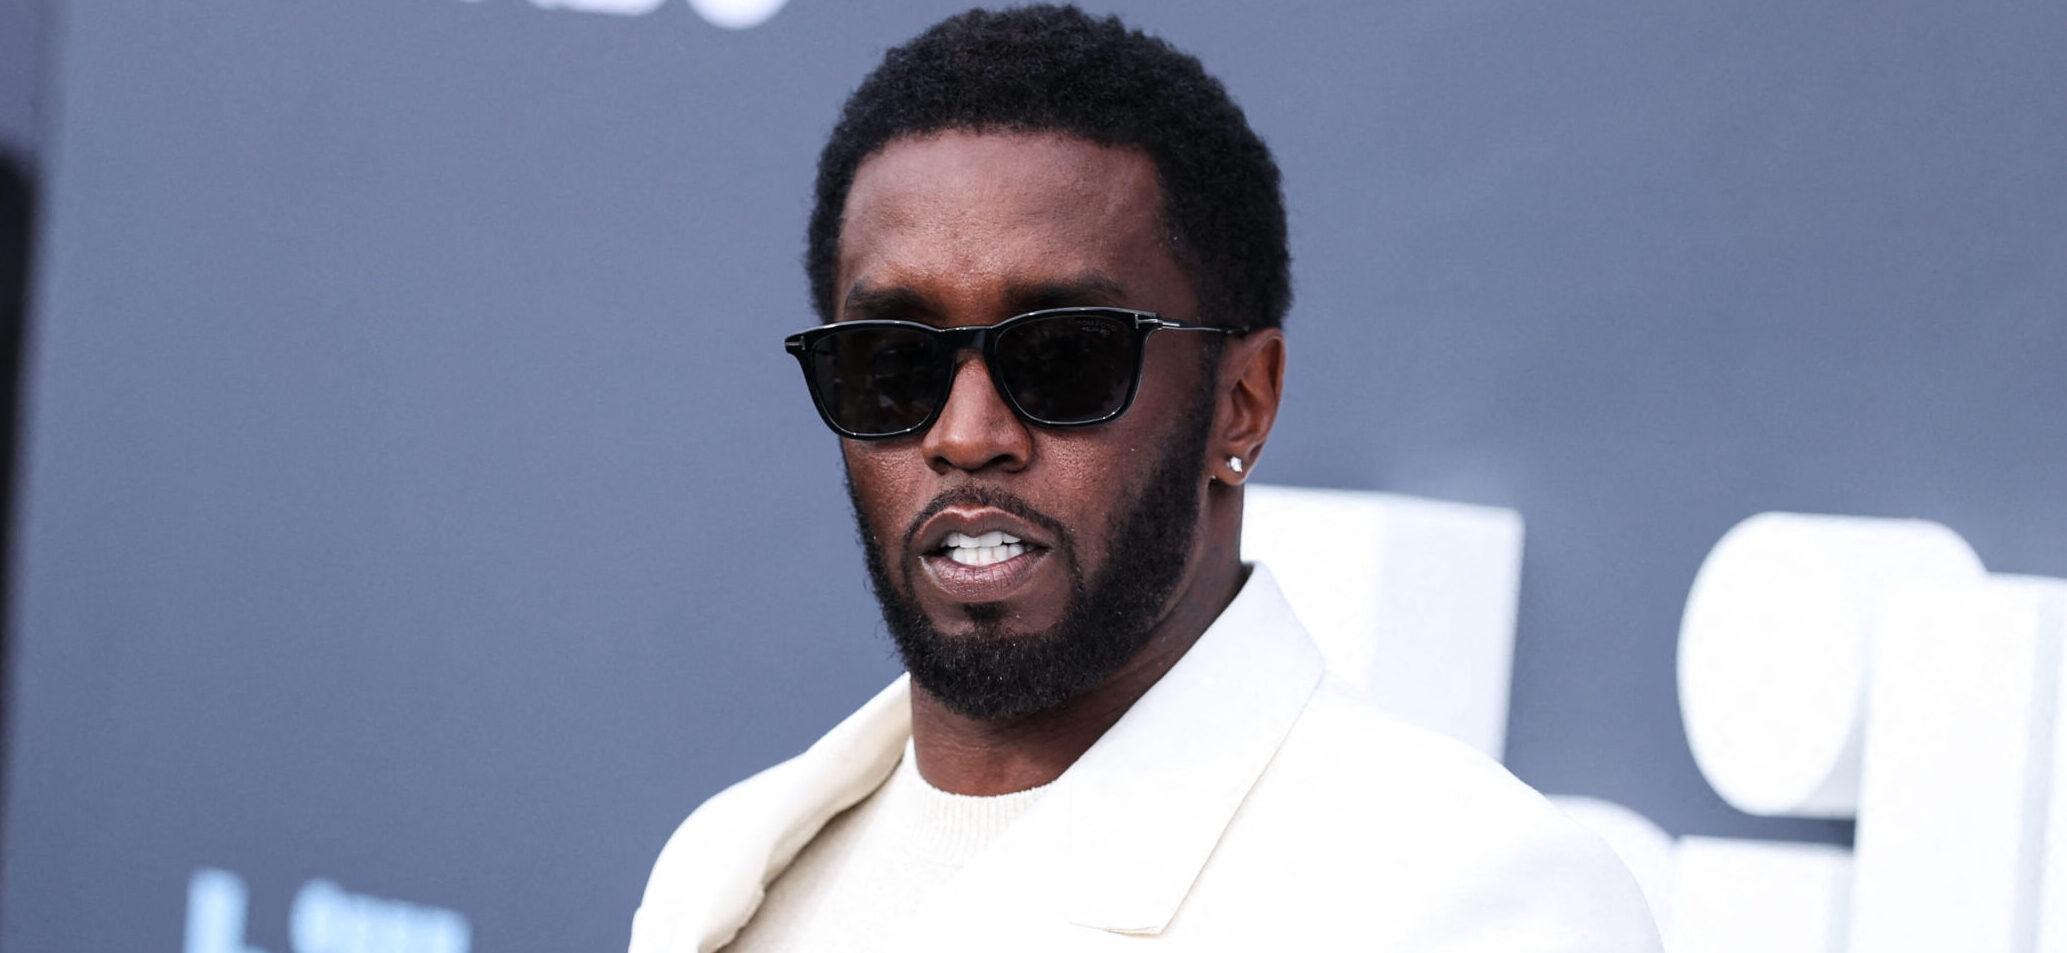 Diddy Addresses ‘Gut-Wrenching’ Video Of Him Beating Up Ex Cassie: ‘I Hit Rock Bottom’